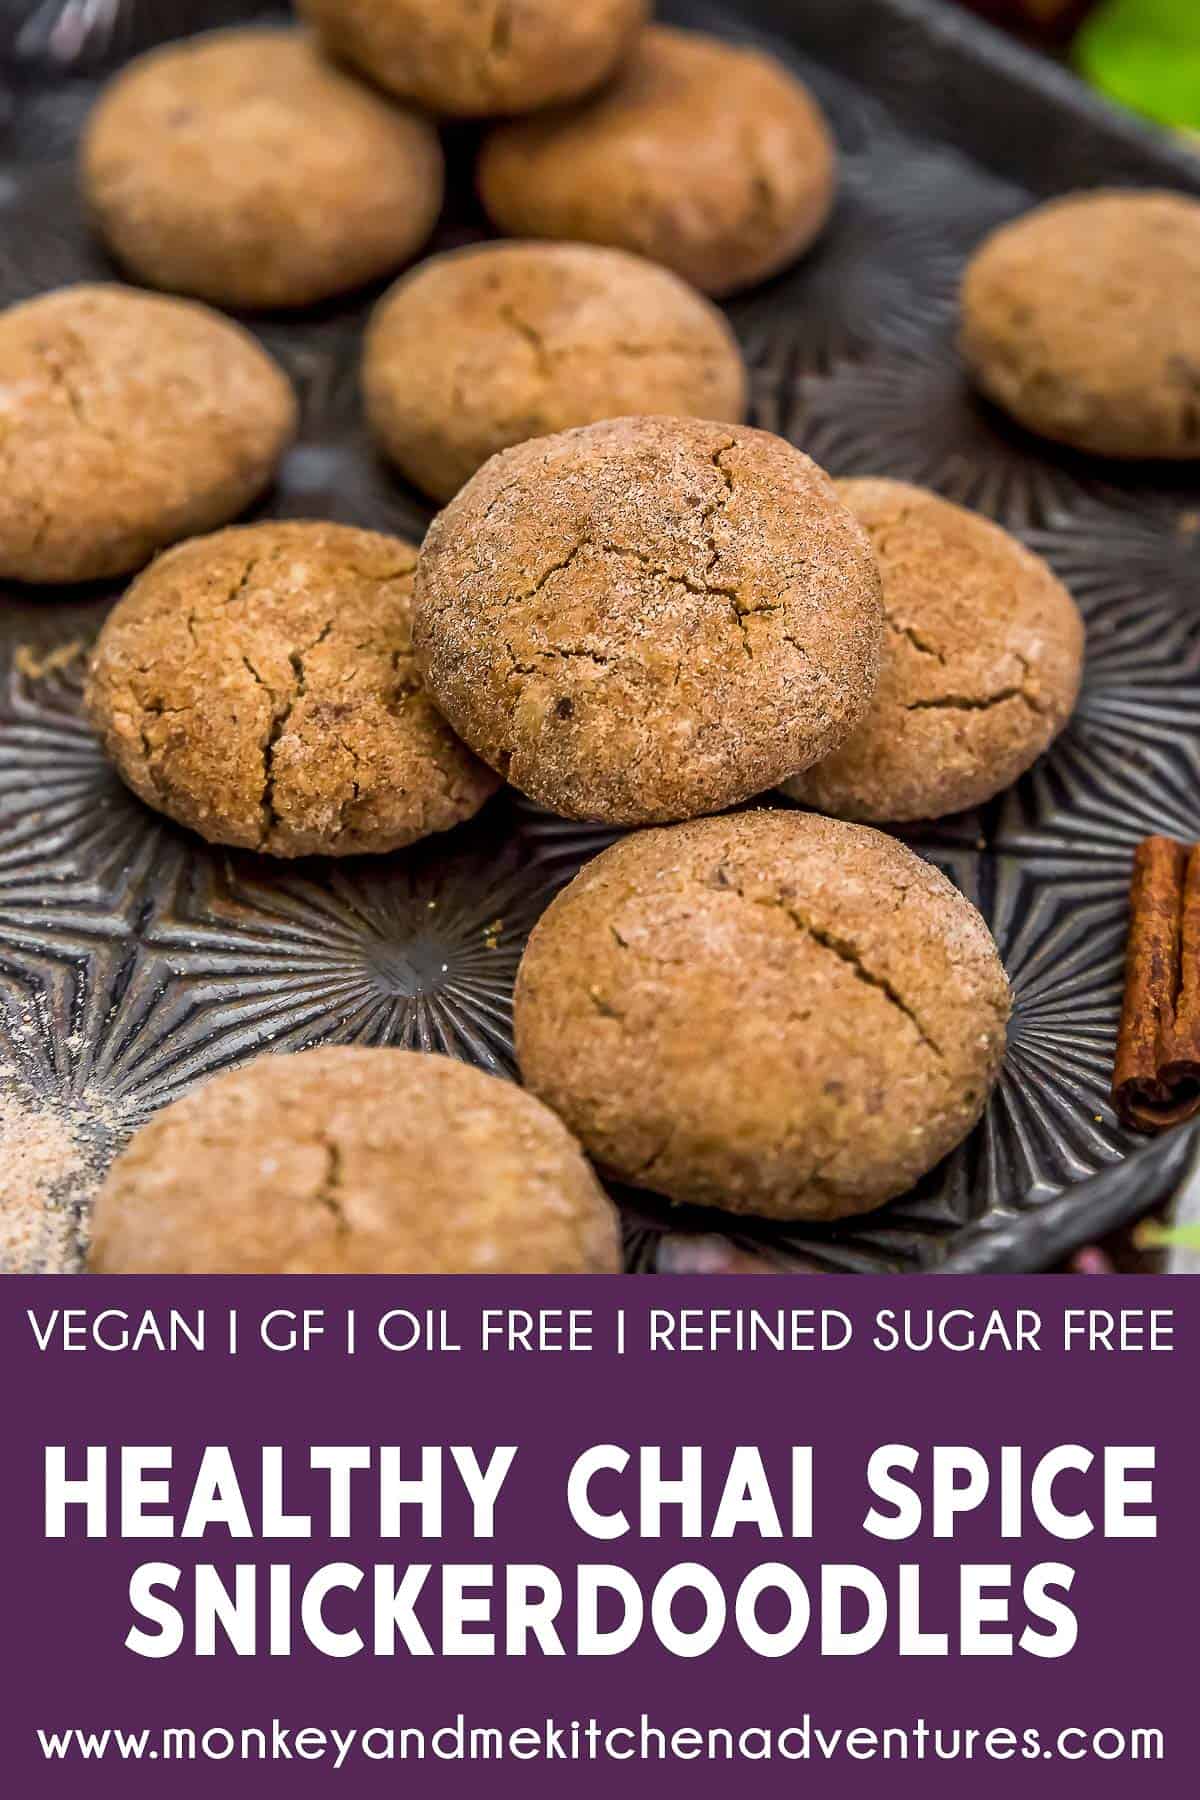 Healthy Chai Spice Snickerdoodles with text description